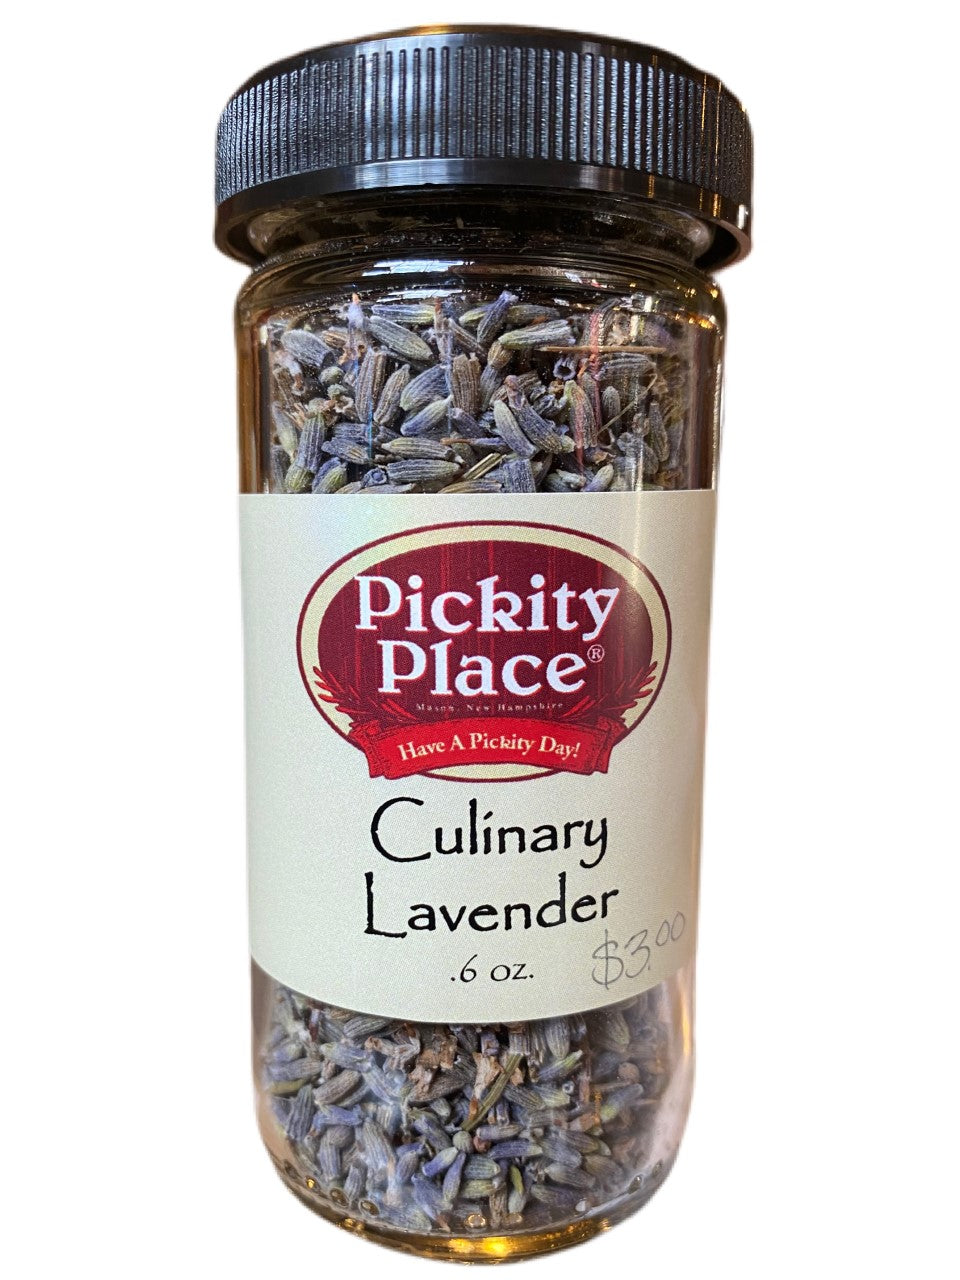 Pickity Place — Culinary Lavender